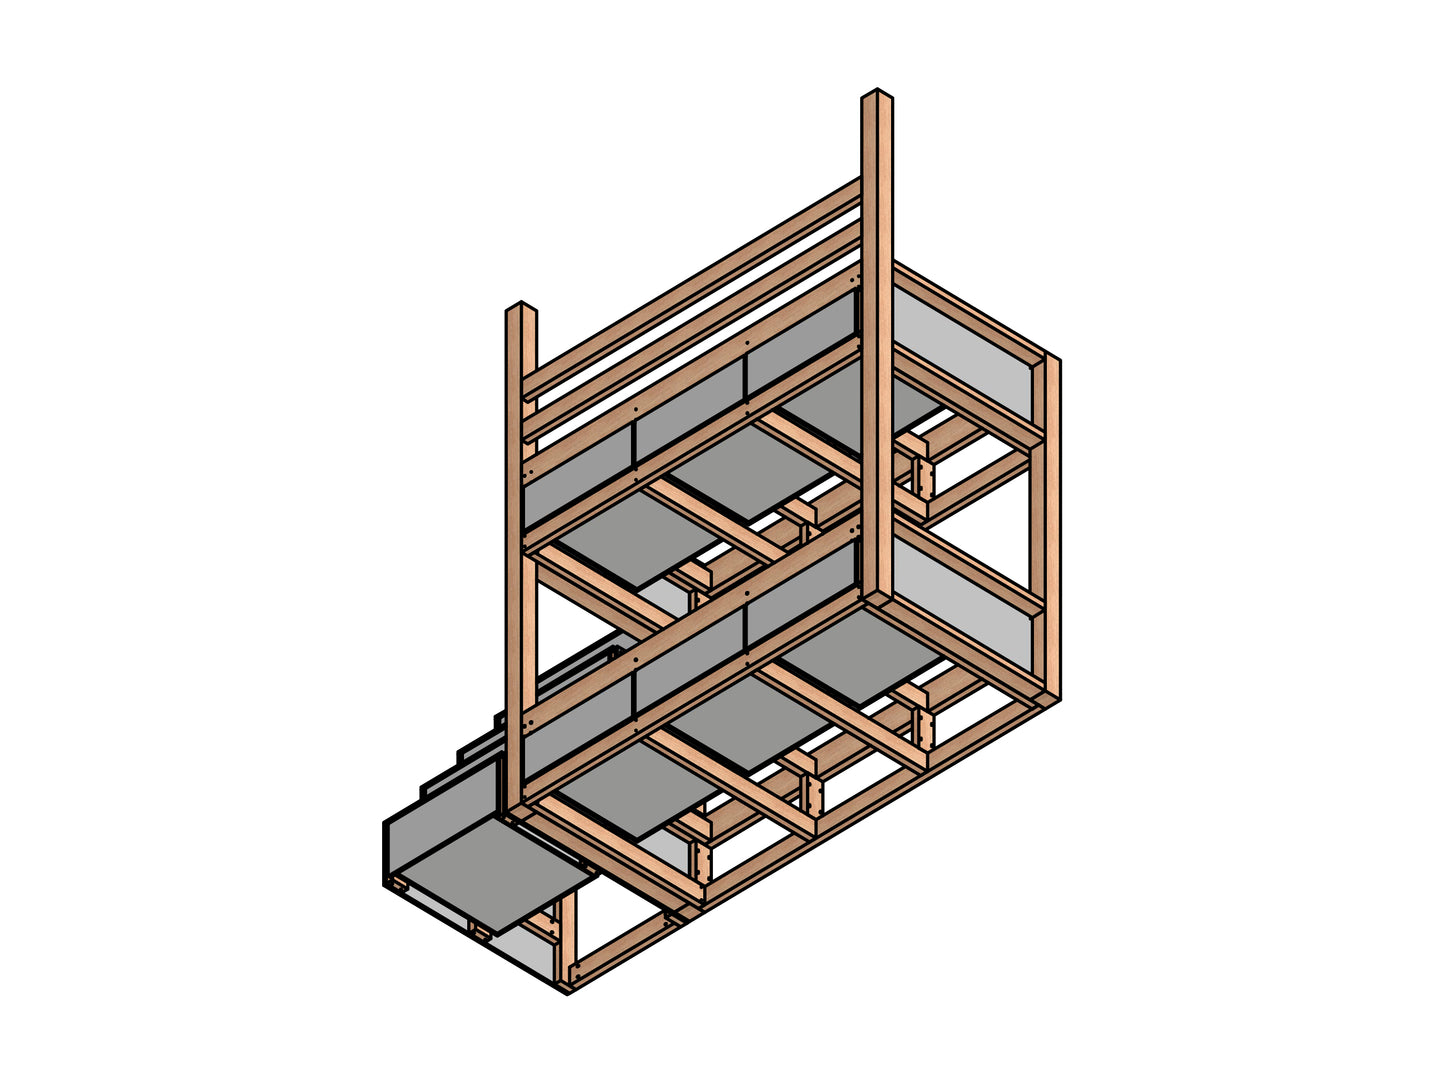 Craft Your 2-Storey Twin Size Bunk Bed with DIY Woodworking Plan